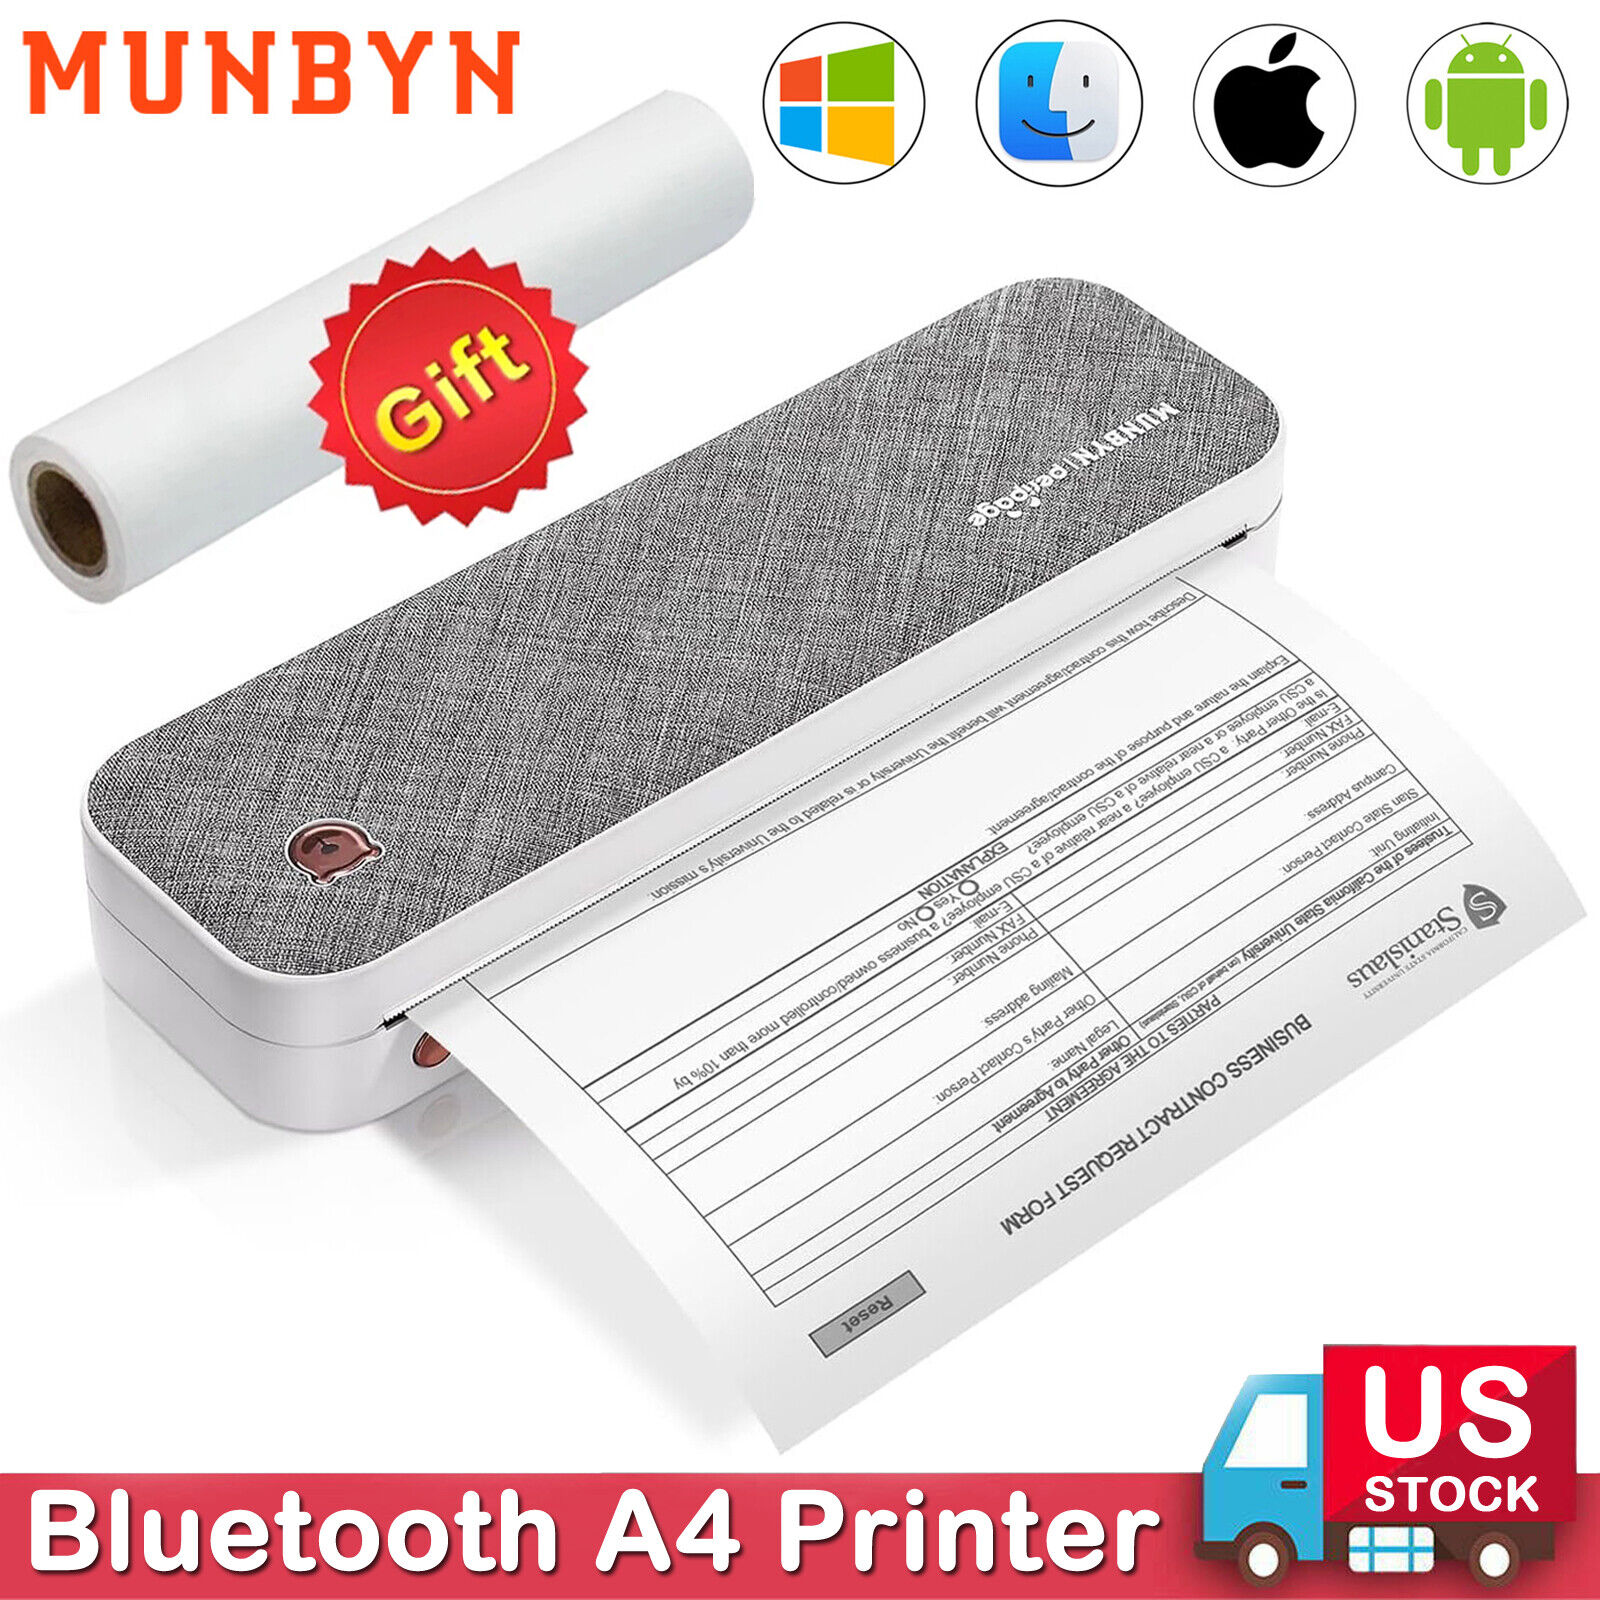 MUNBYN Portable A4 Bluetooth Thermal Printer US Letter Size Printer for PC Phone